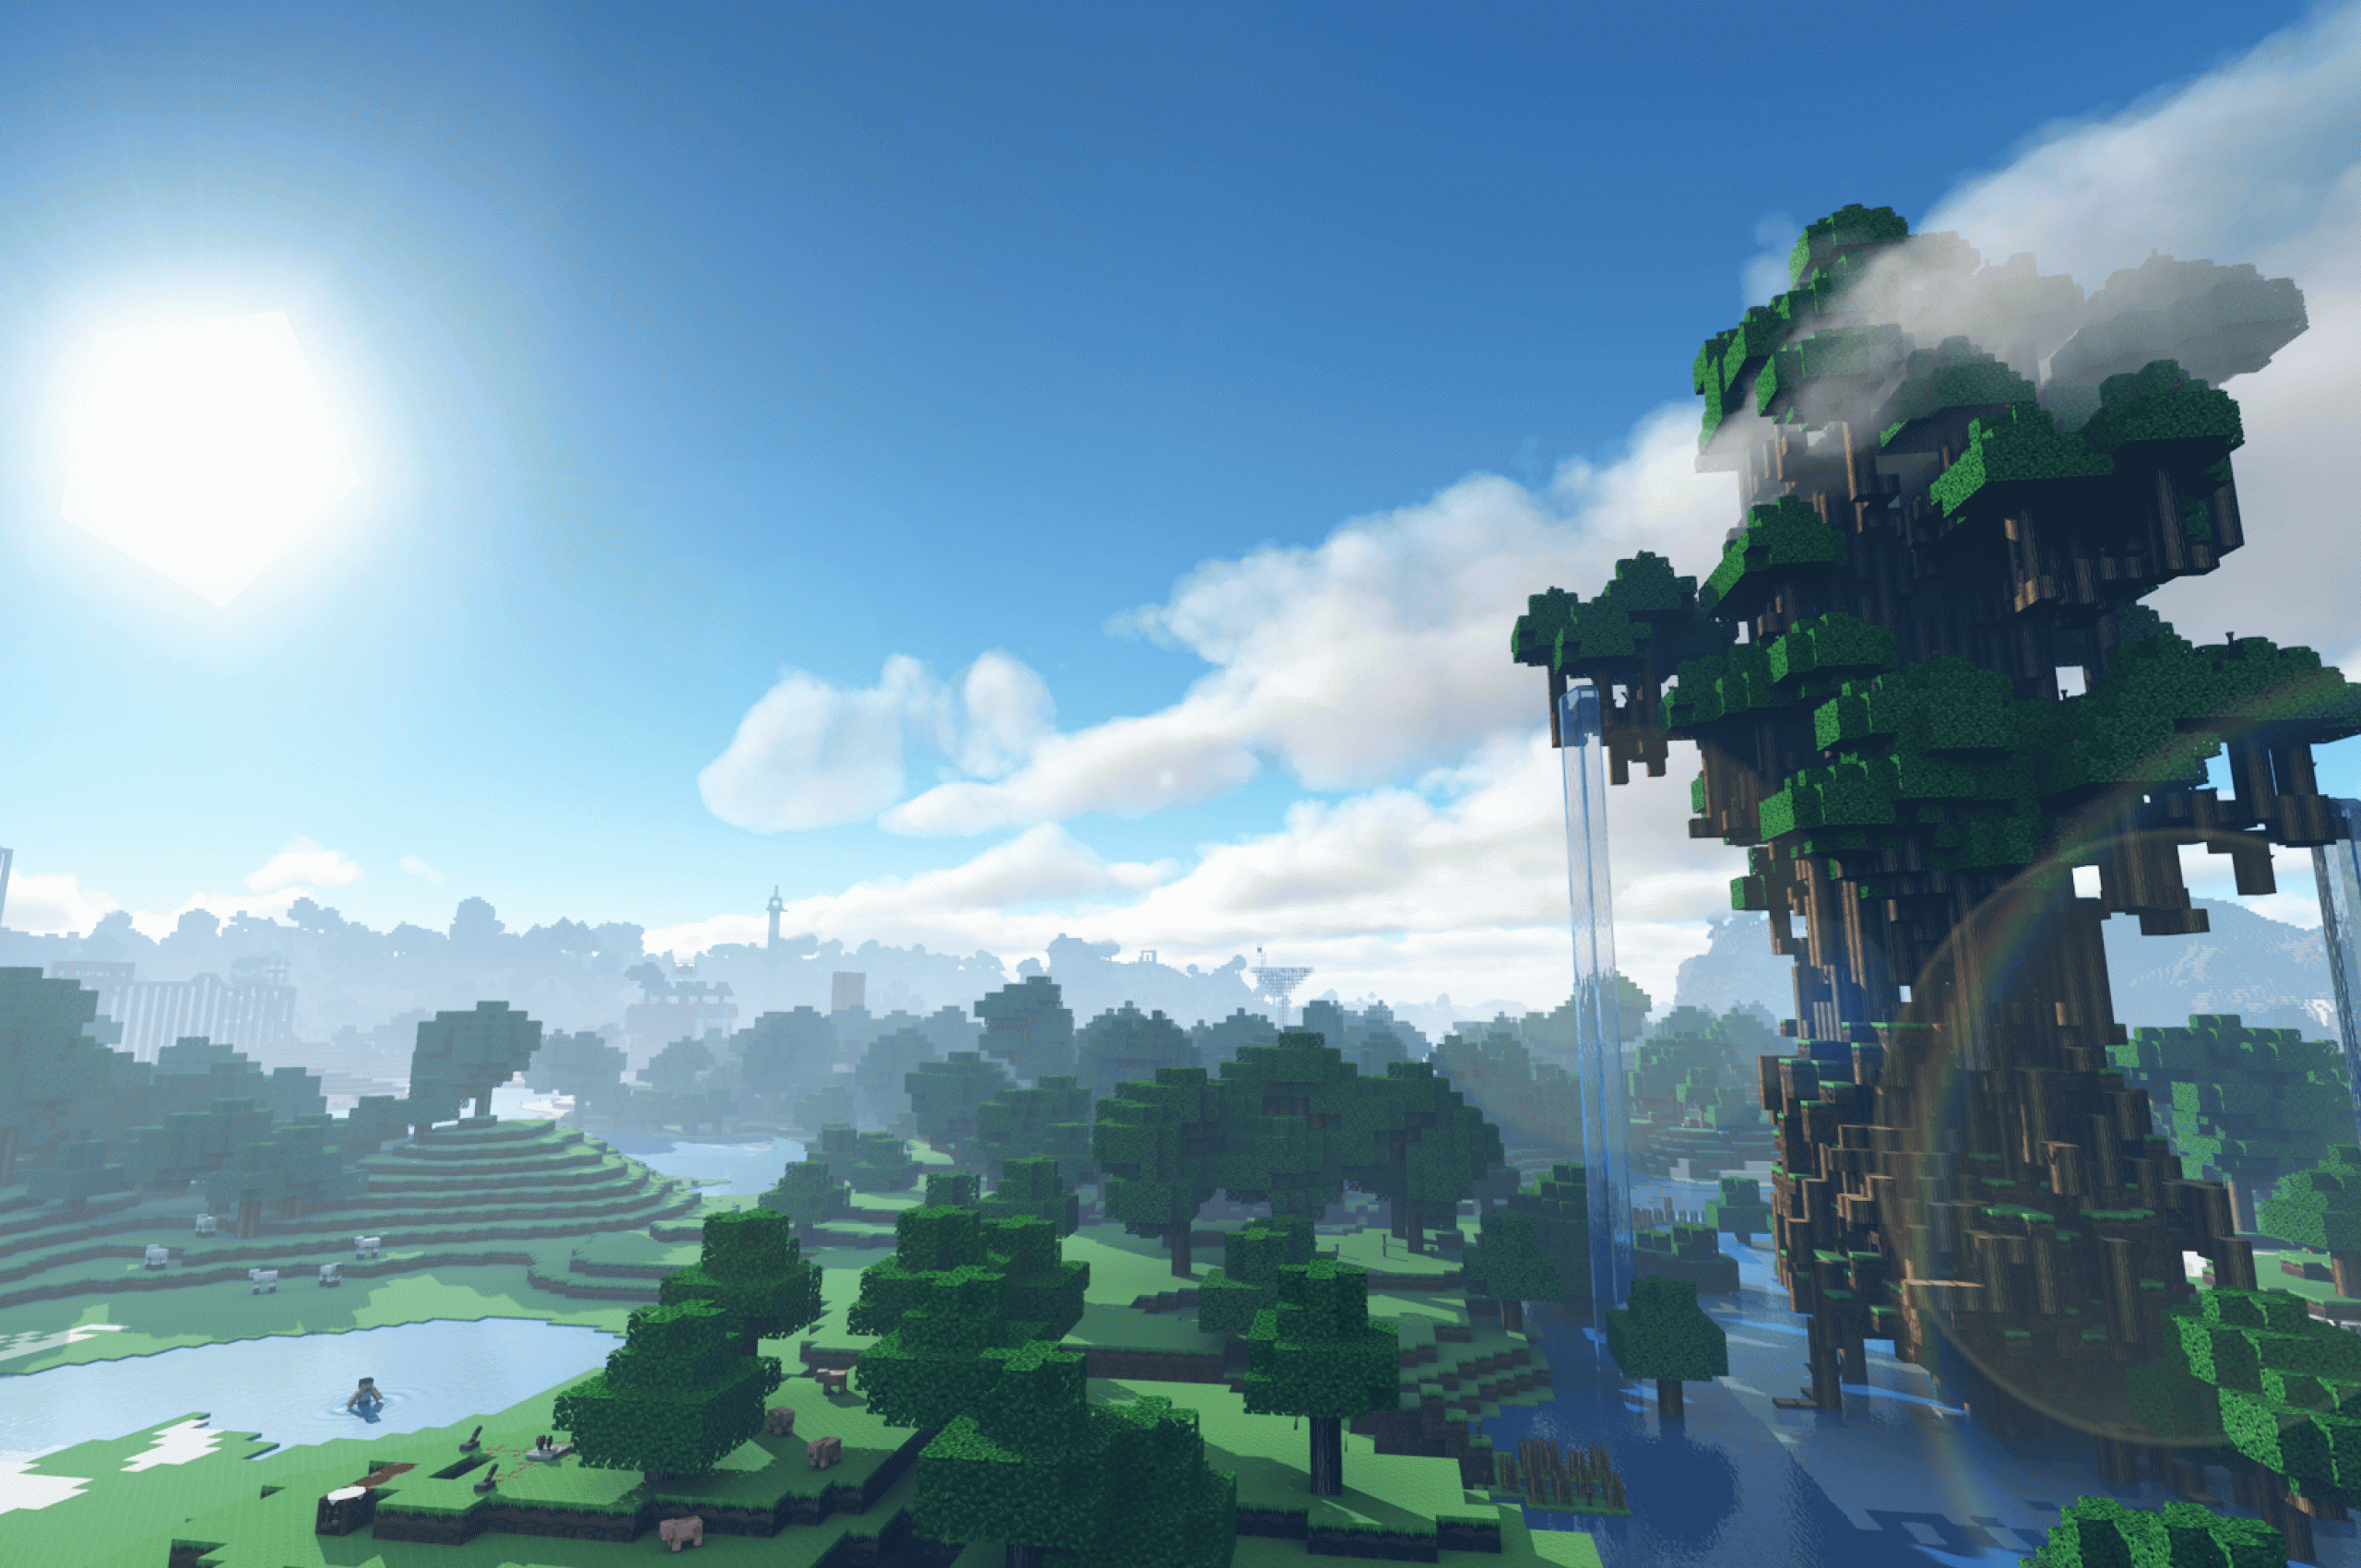 Minecraft Aesthetic Wallpapers - Top Free Minecraft Aesthetic Backgrounds -  WallpaperAccess